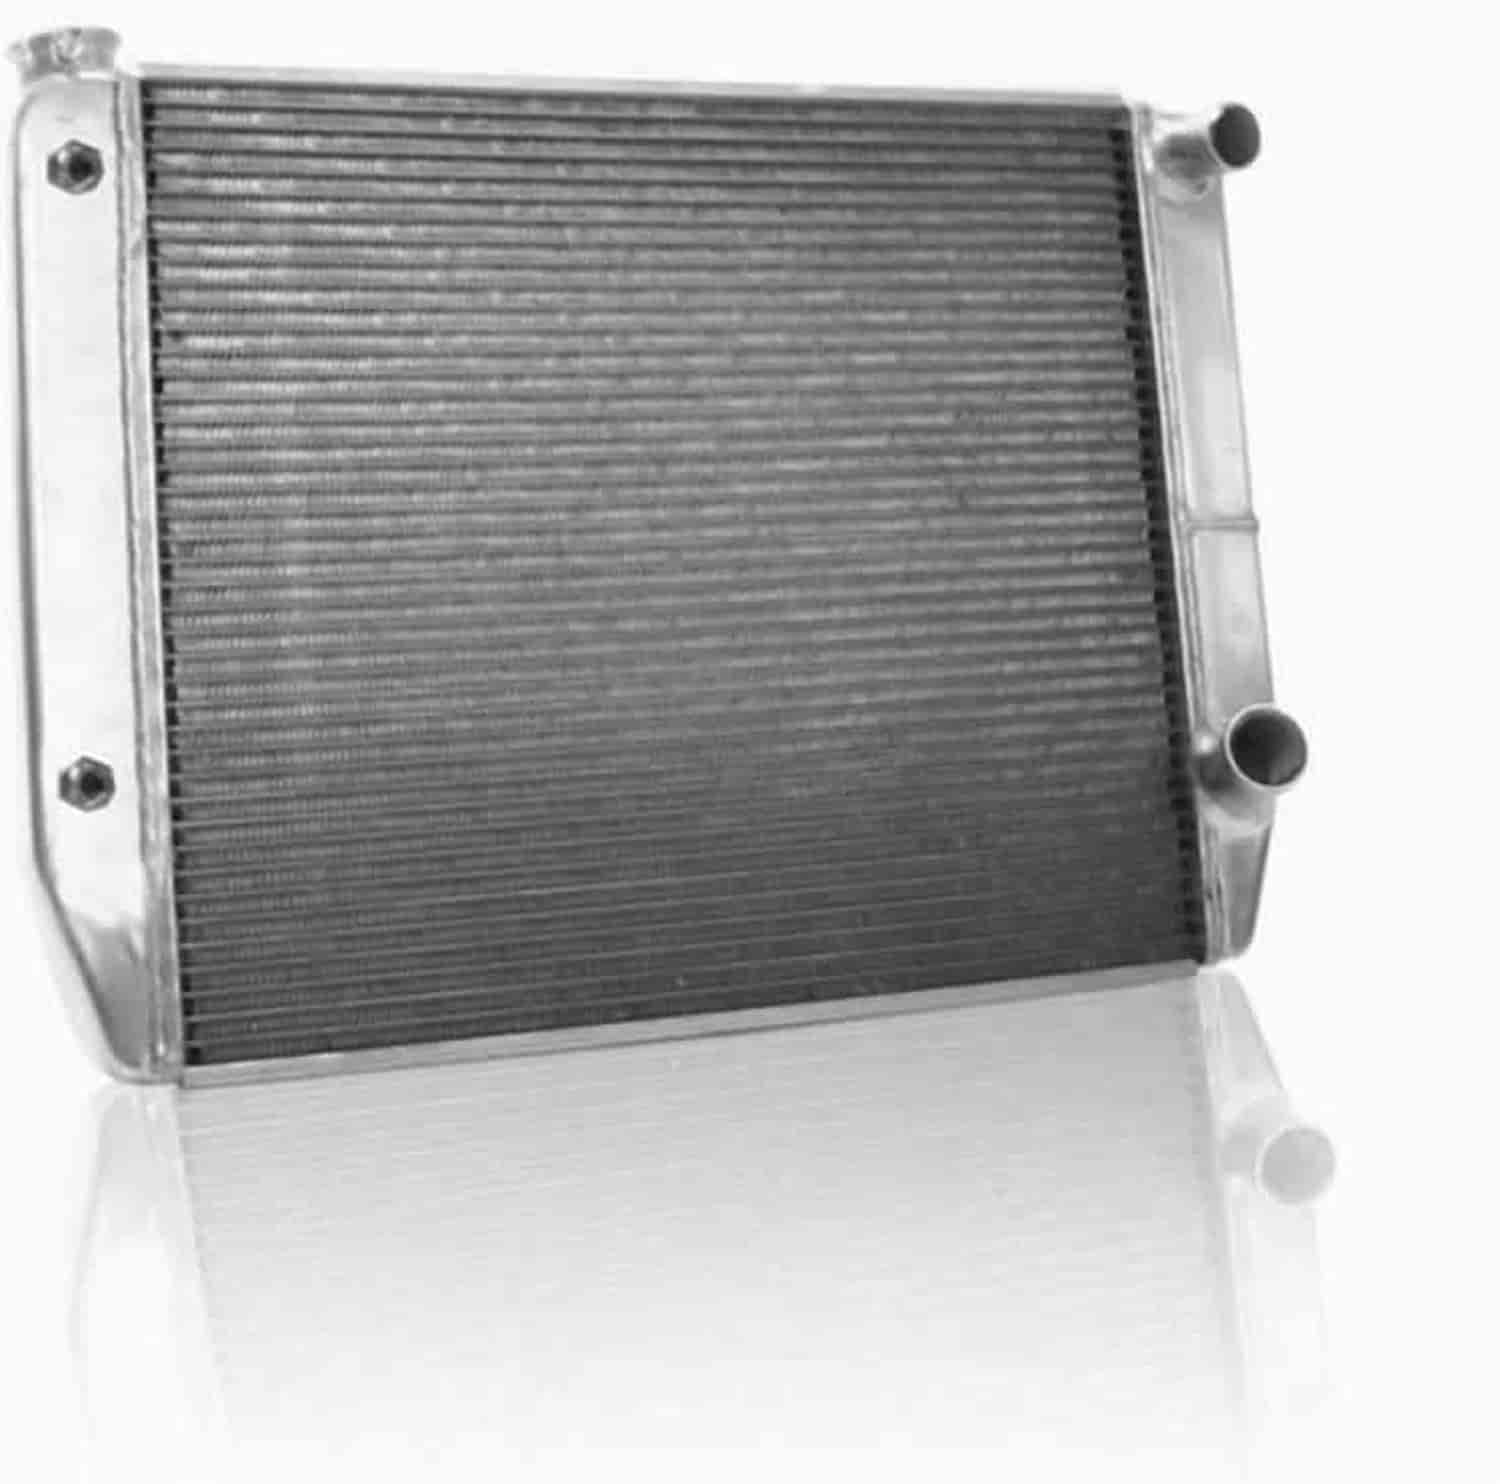 MegaCool Universal Fit Radiator Dual Pass Crossflow Design 26" x 19" with Transmission Cooler